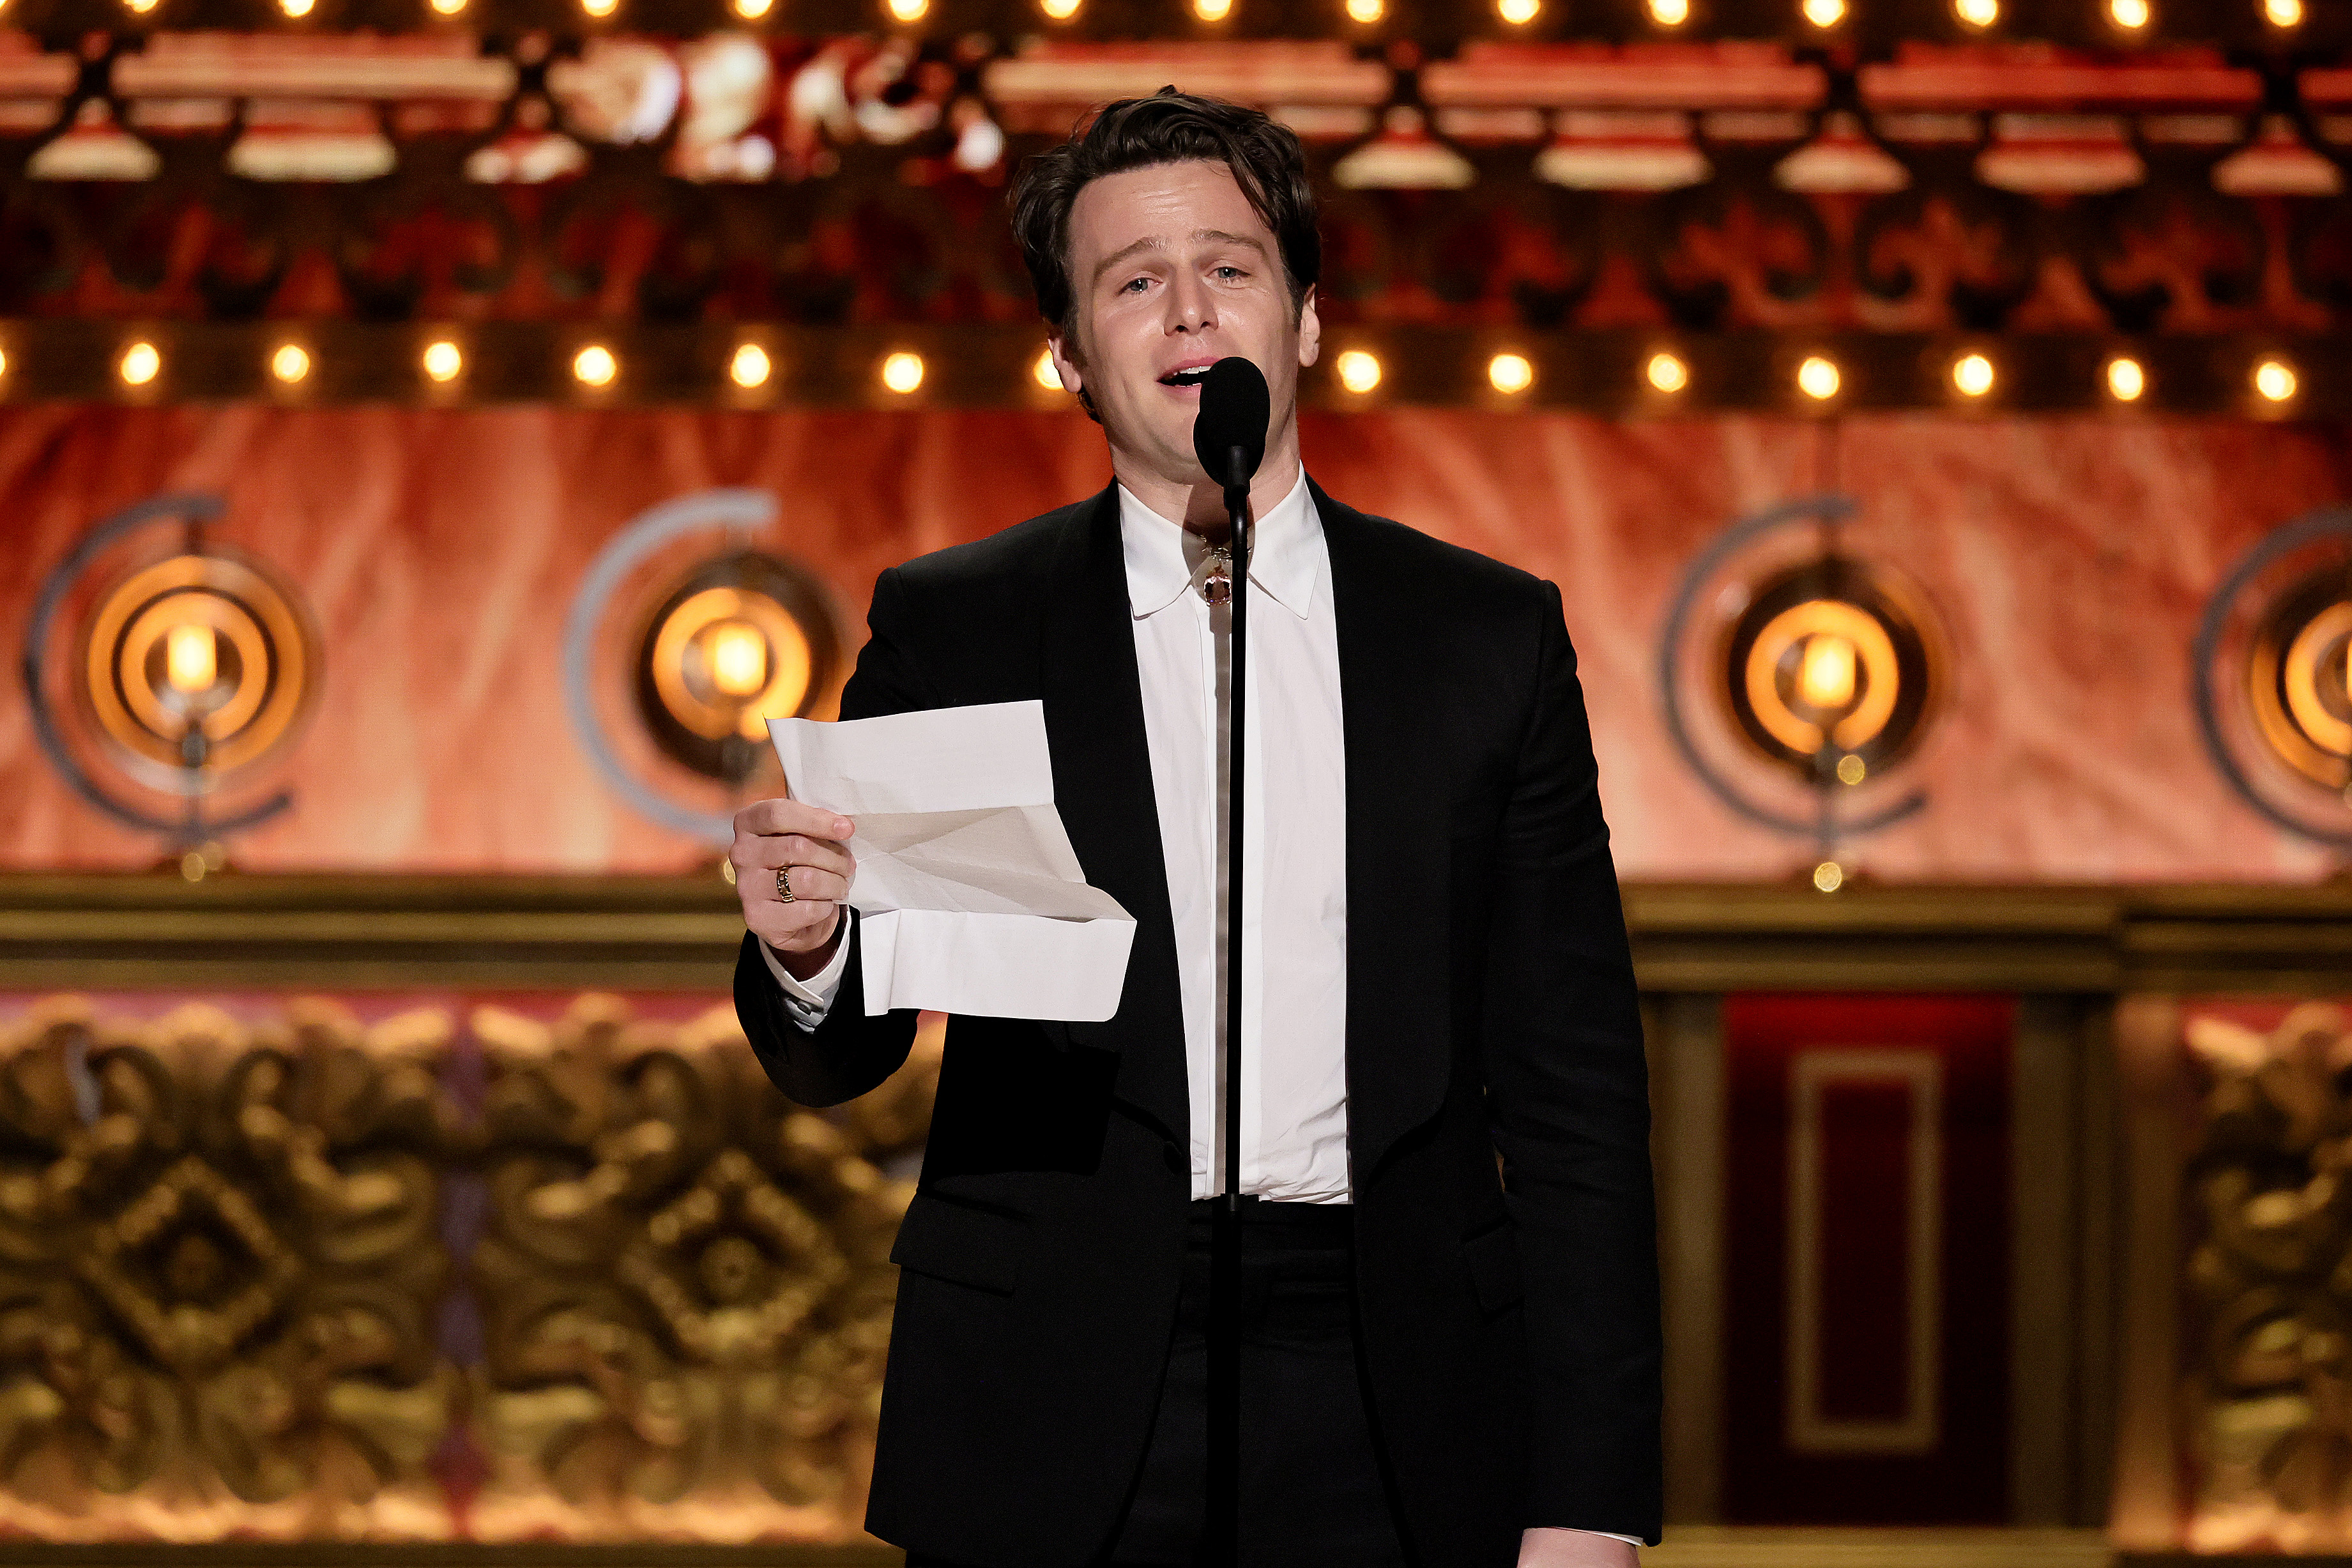 Jonathan Groff speaks into a microphone on stage, holding a piece of paper, dressed in a black suit with a white shirt, at an award ceremony